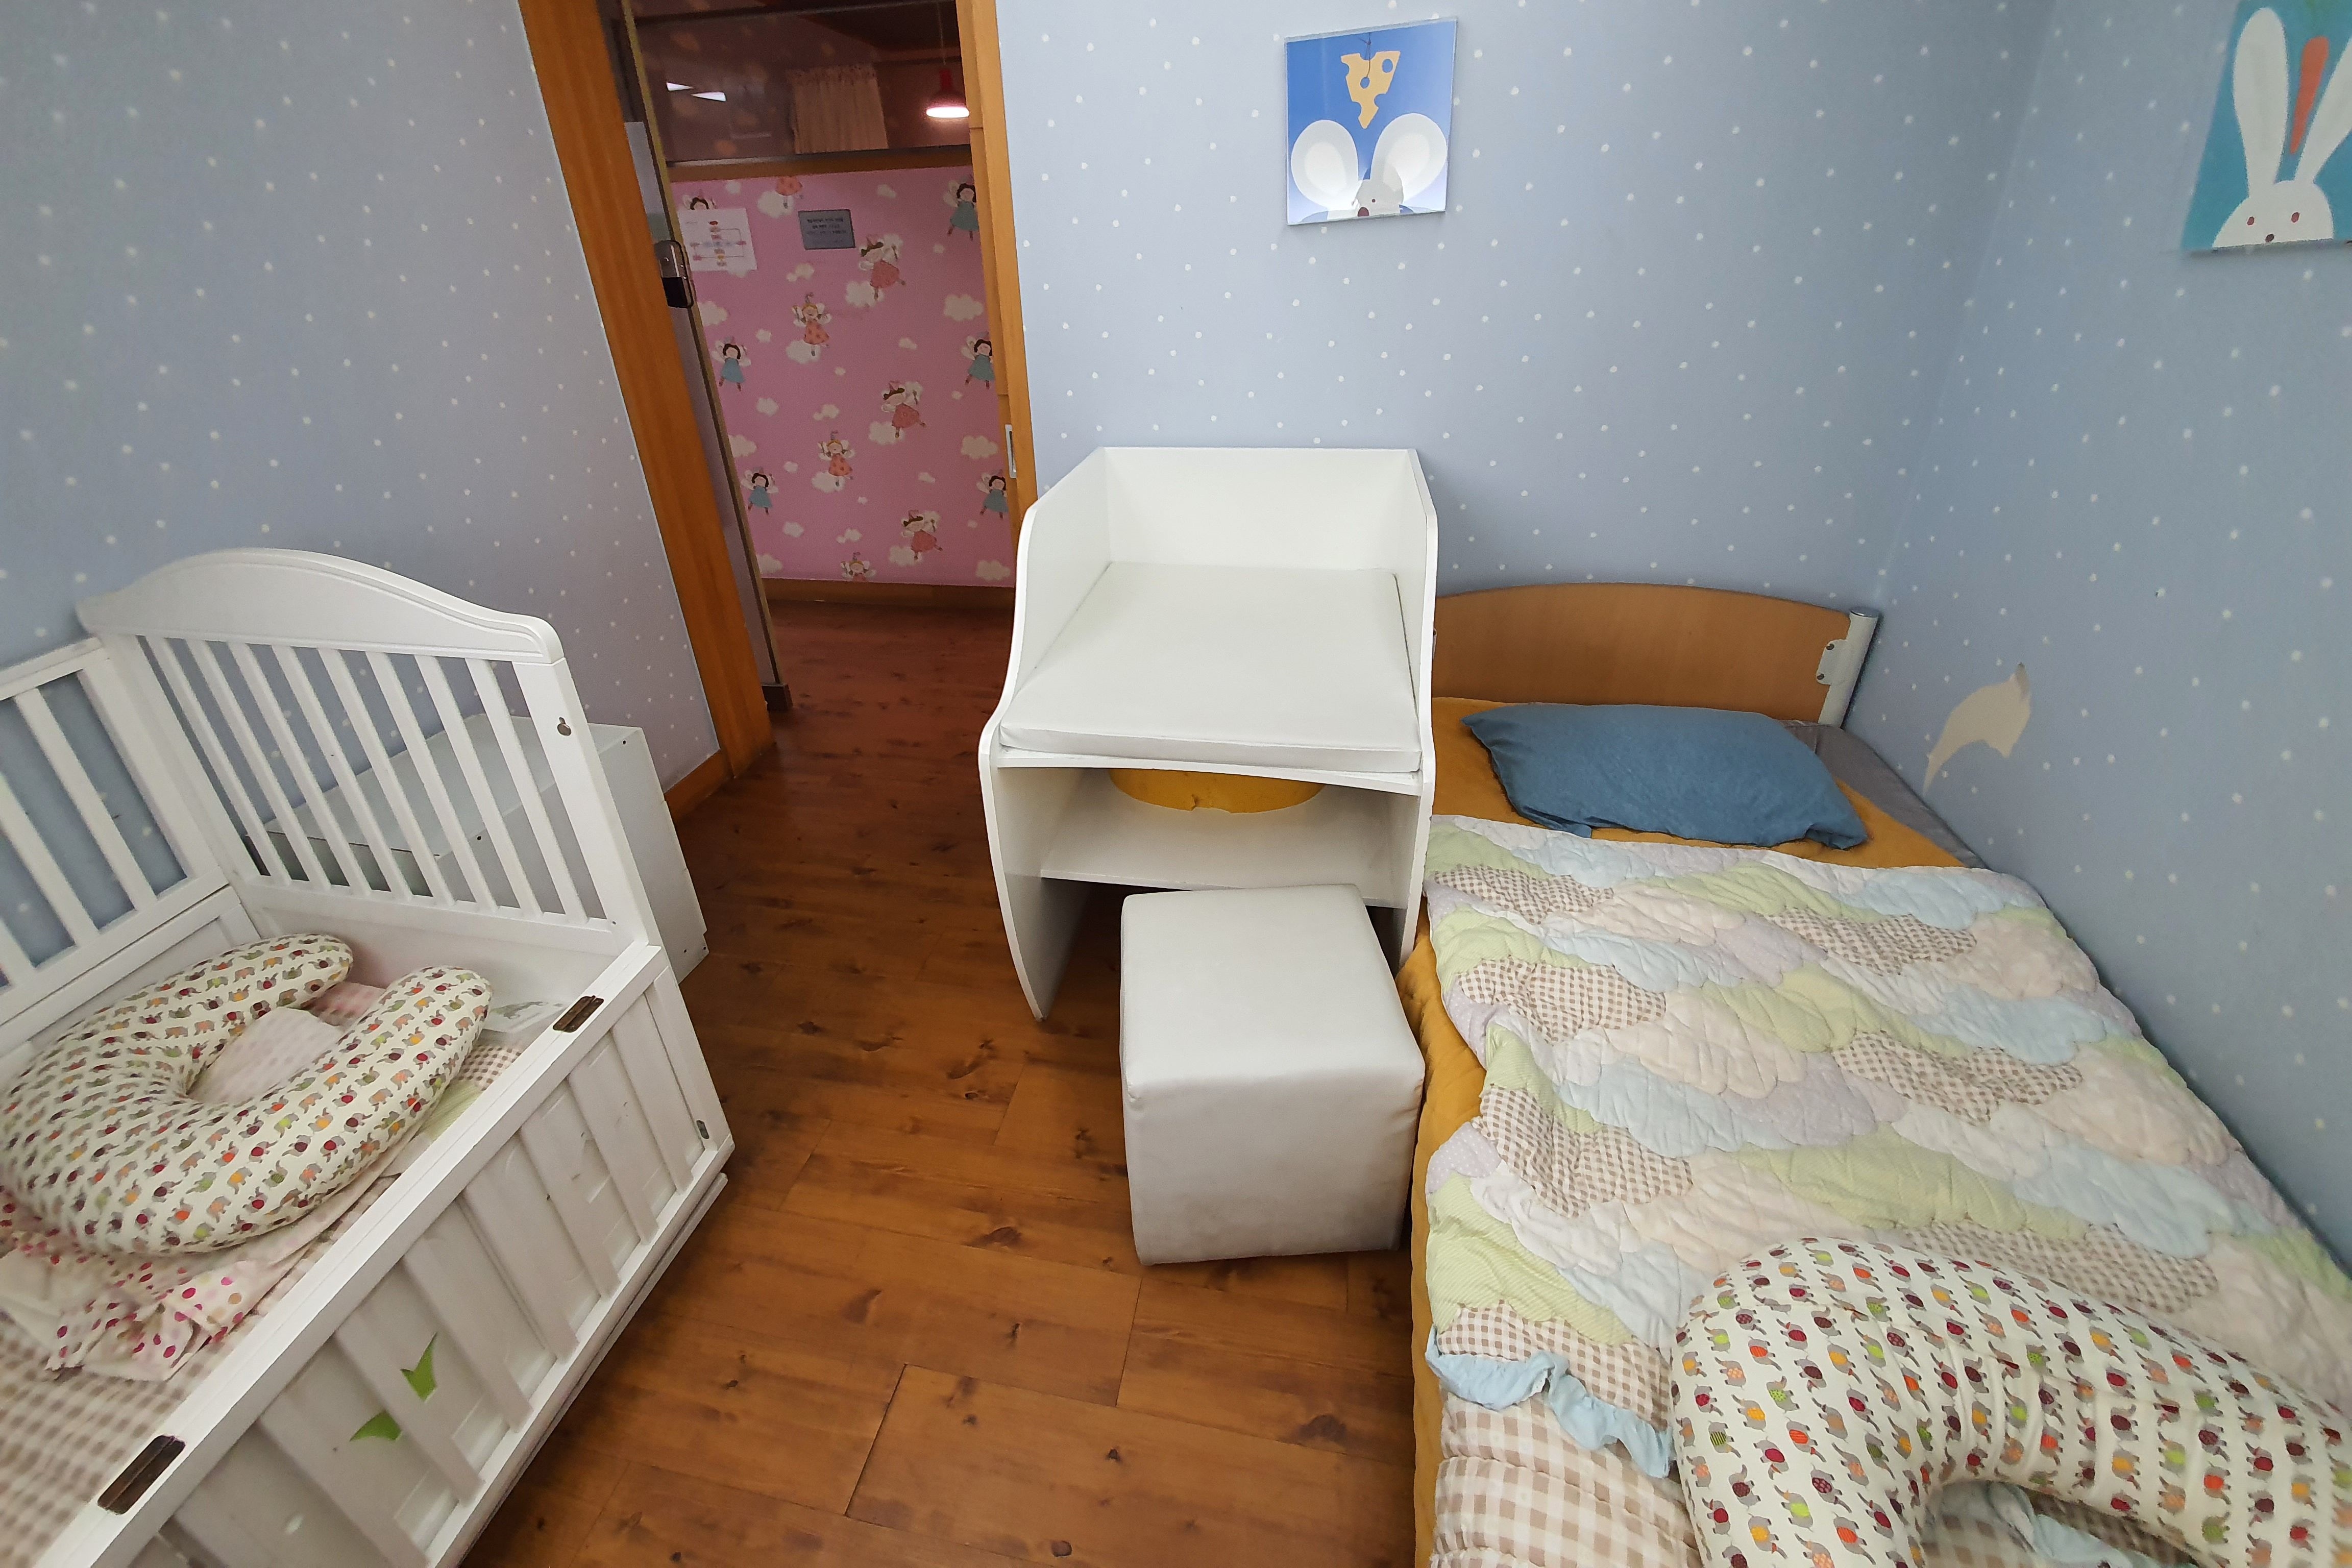 Nursing room0 : interior view of the nursing room with diaper changing station, baby bed, adult-sized beds and bedding